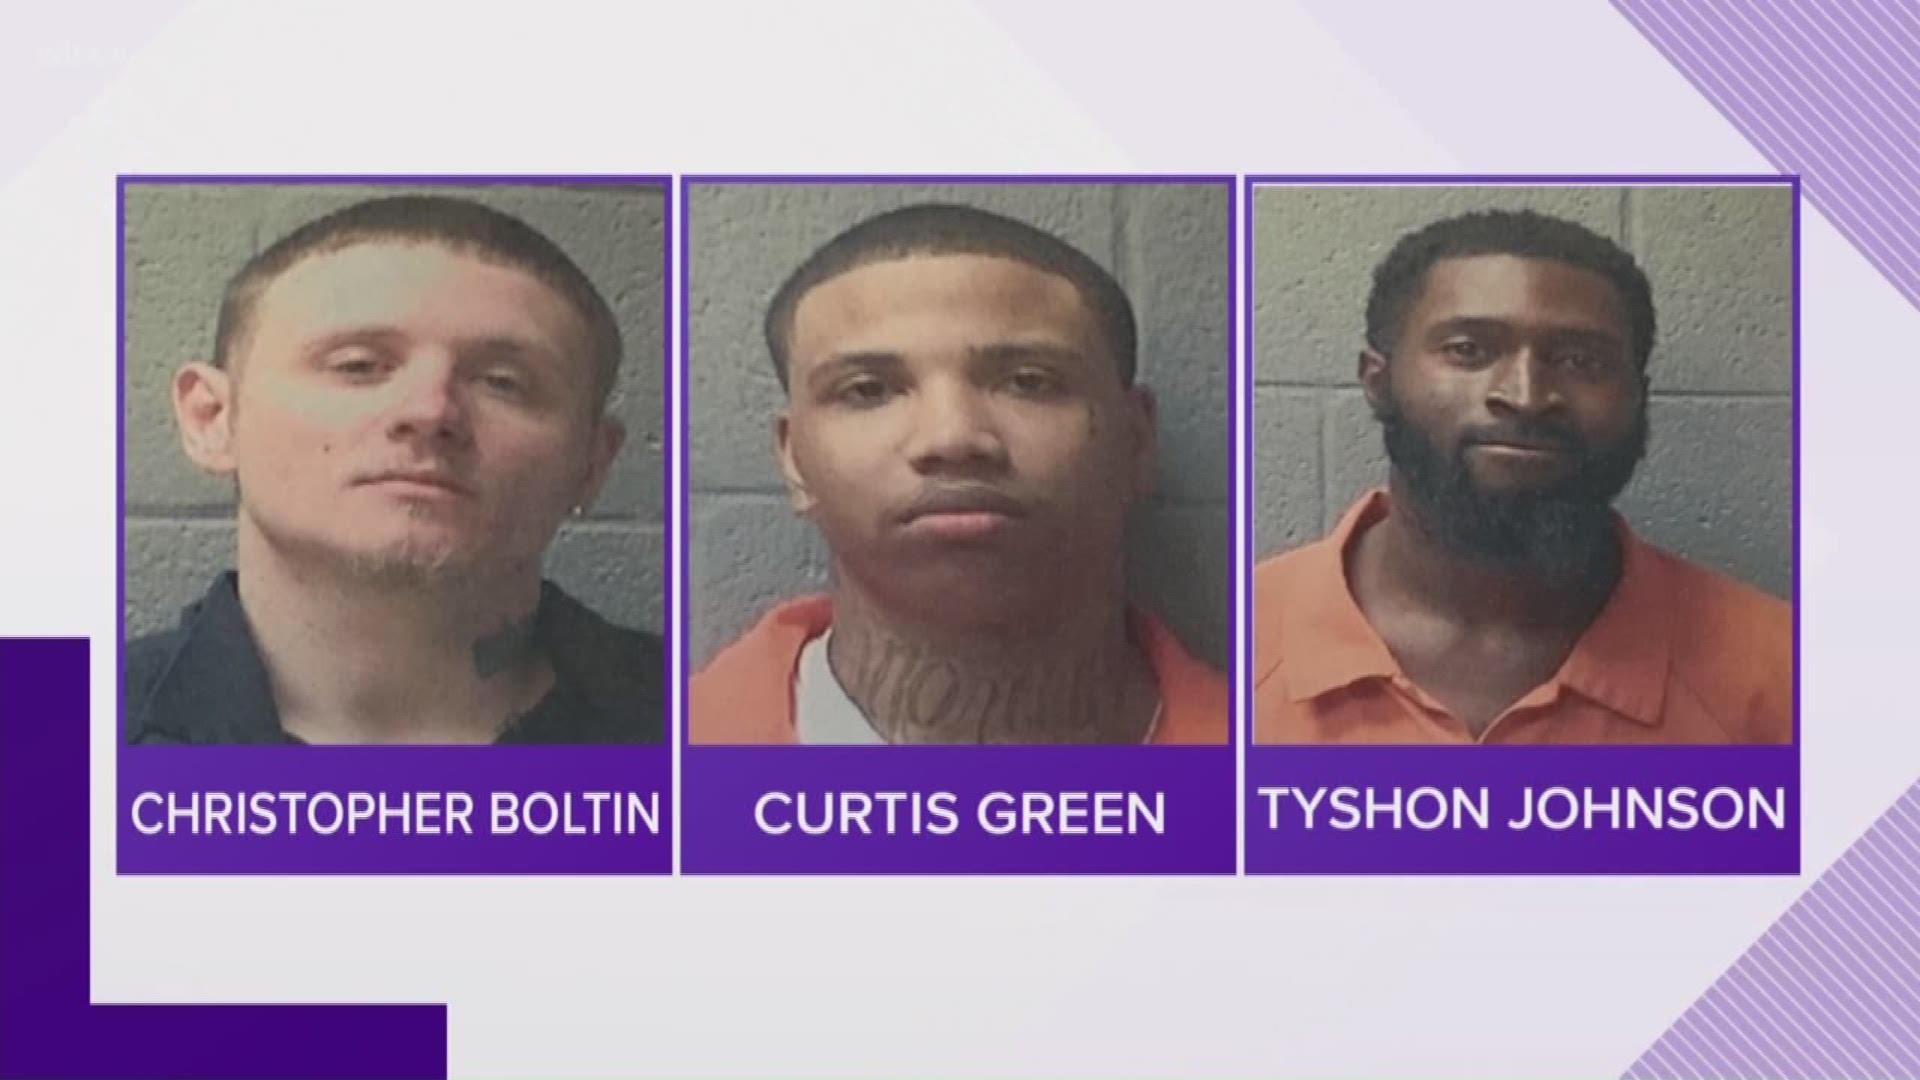 Deputies are on the look out for three 'dangerous' inmates who escaped the Orangeburg County Detention Center Saturday night.